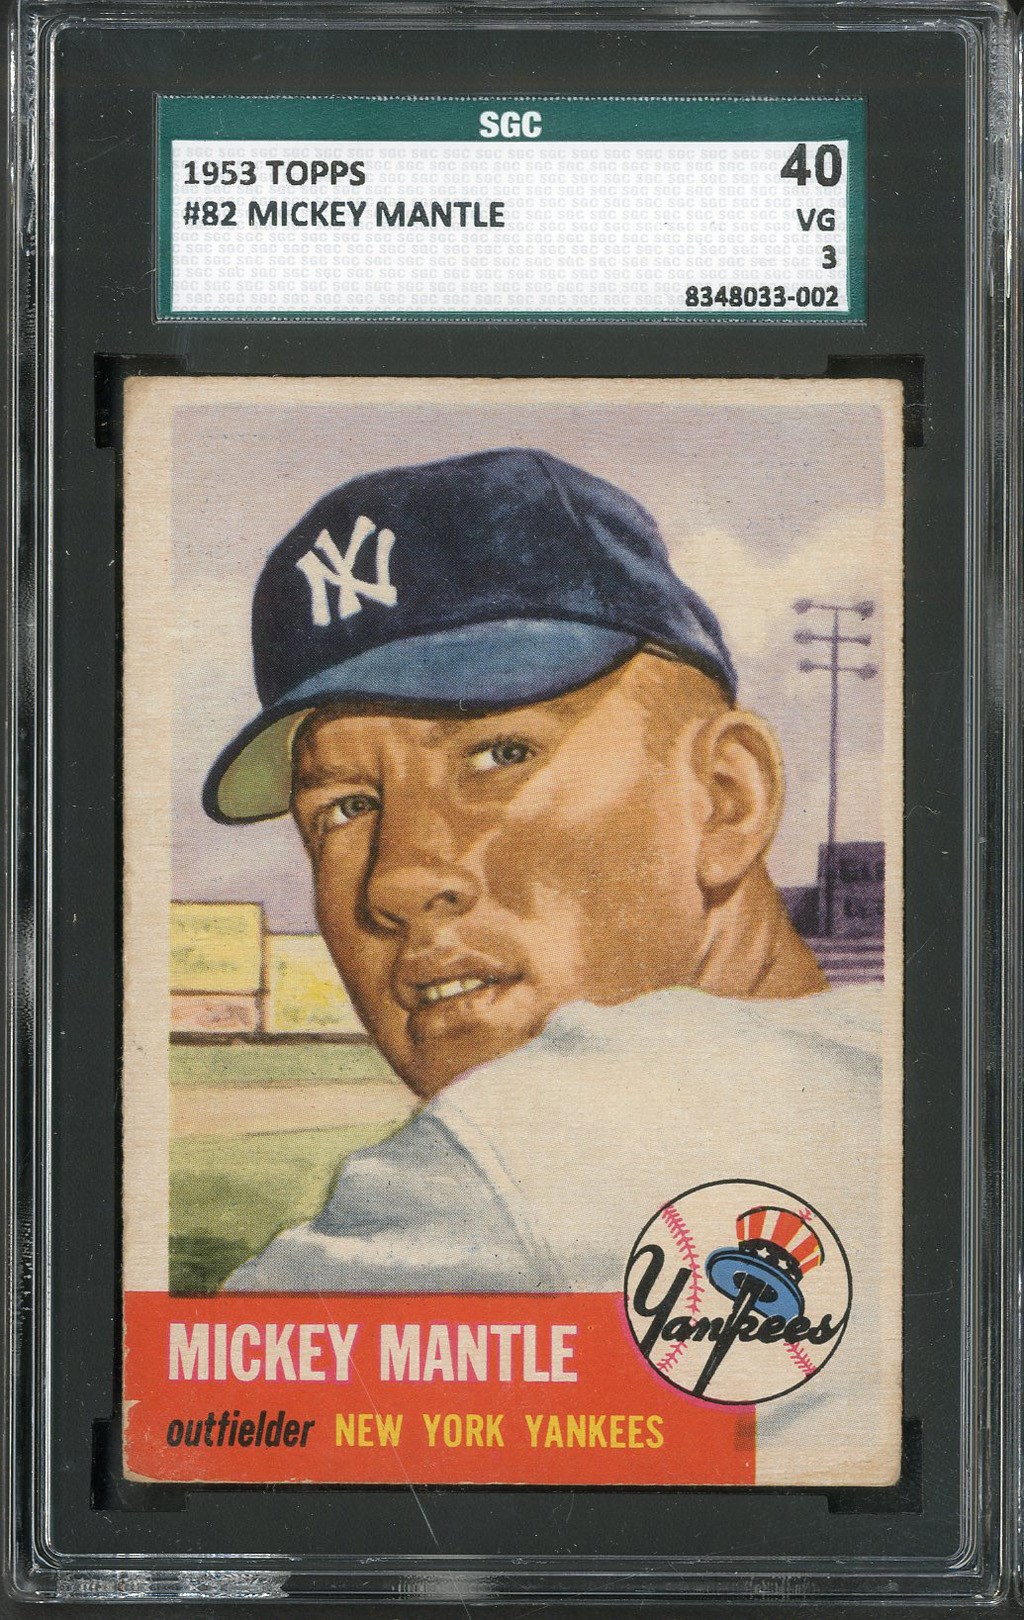 Baseball and Trading Cards - 1953 Topps #83 Mickey Mantle - SGC 40 VG 3